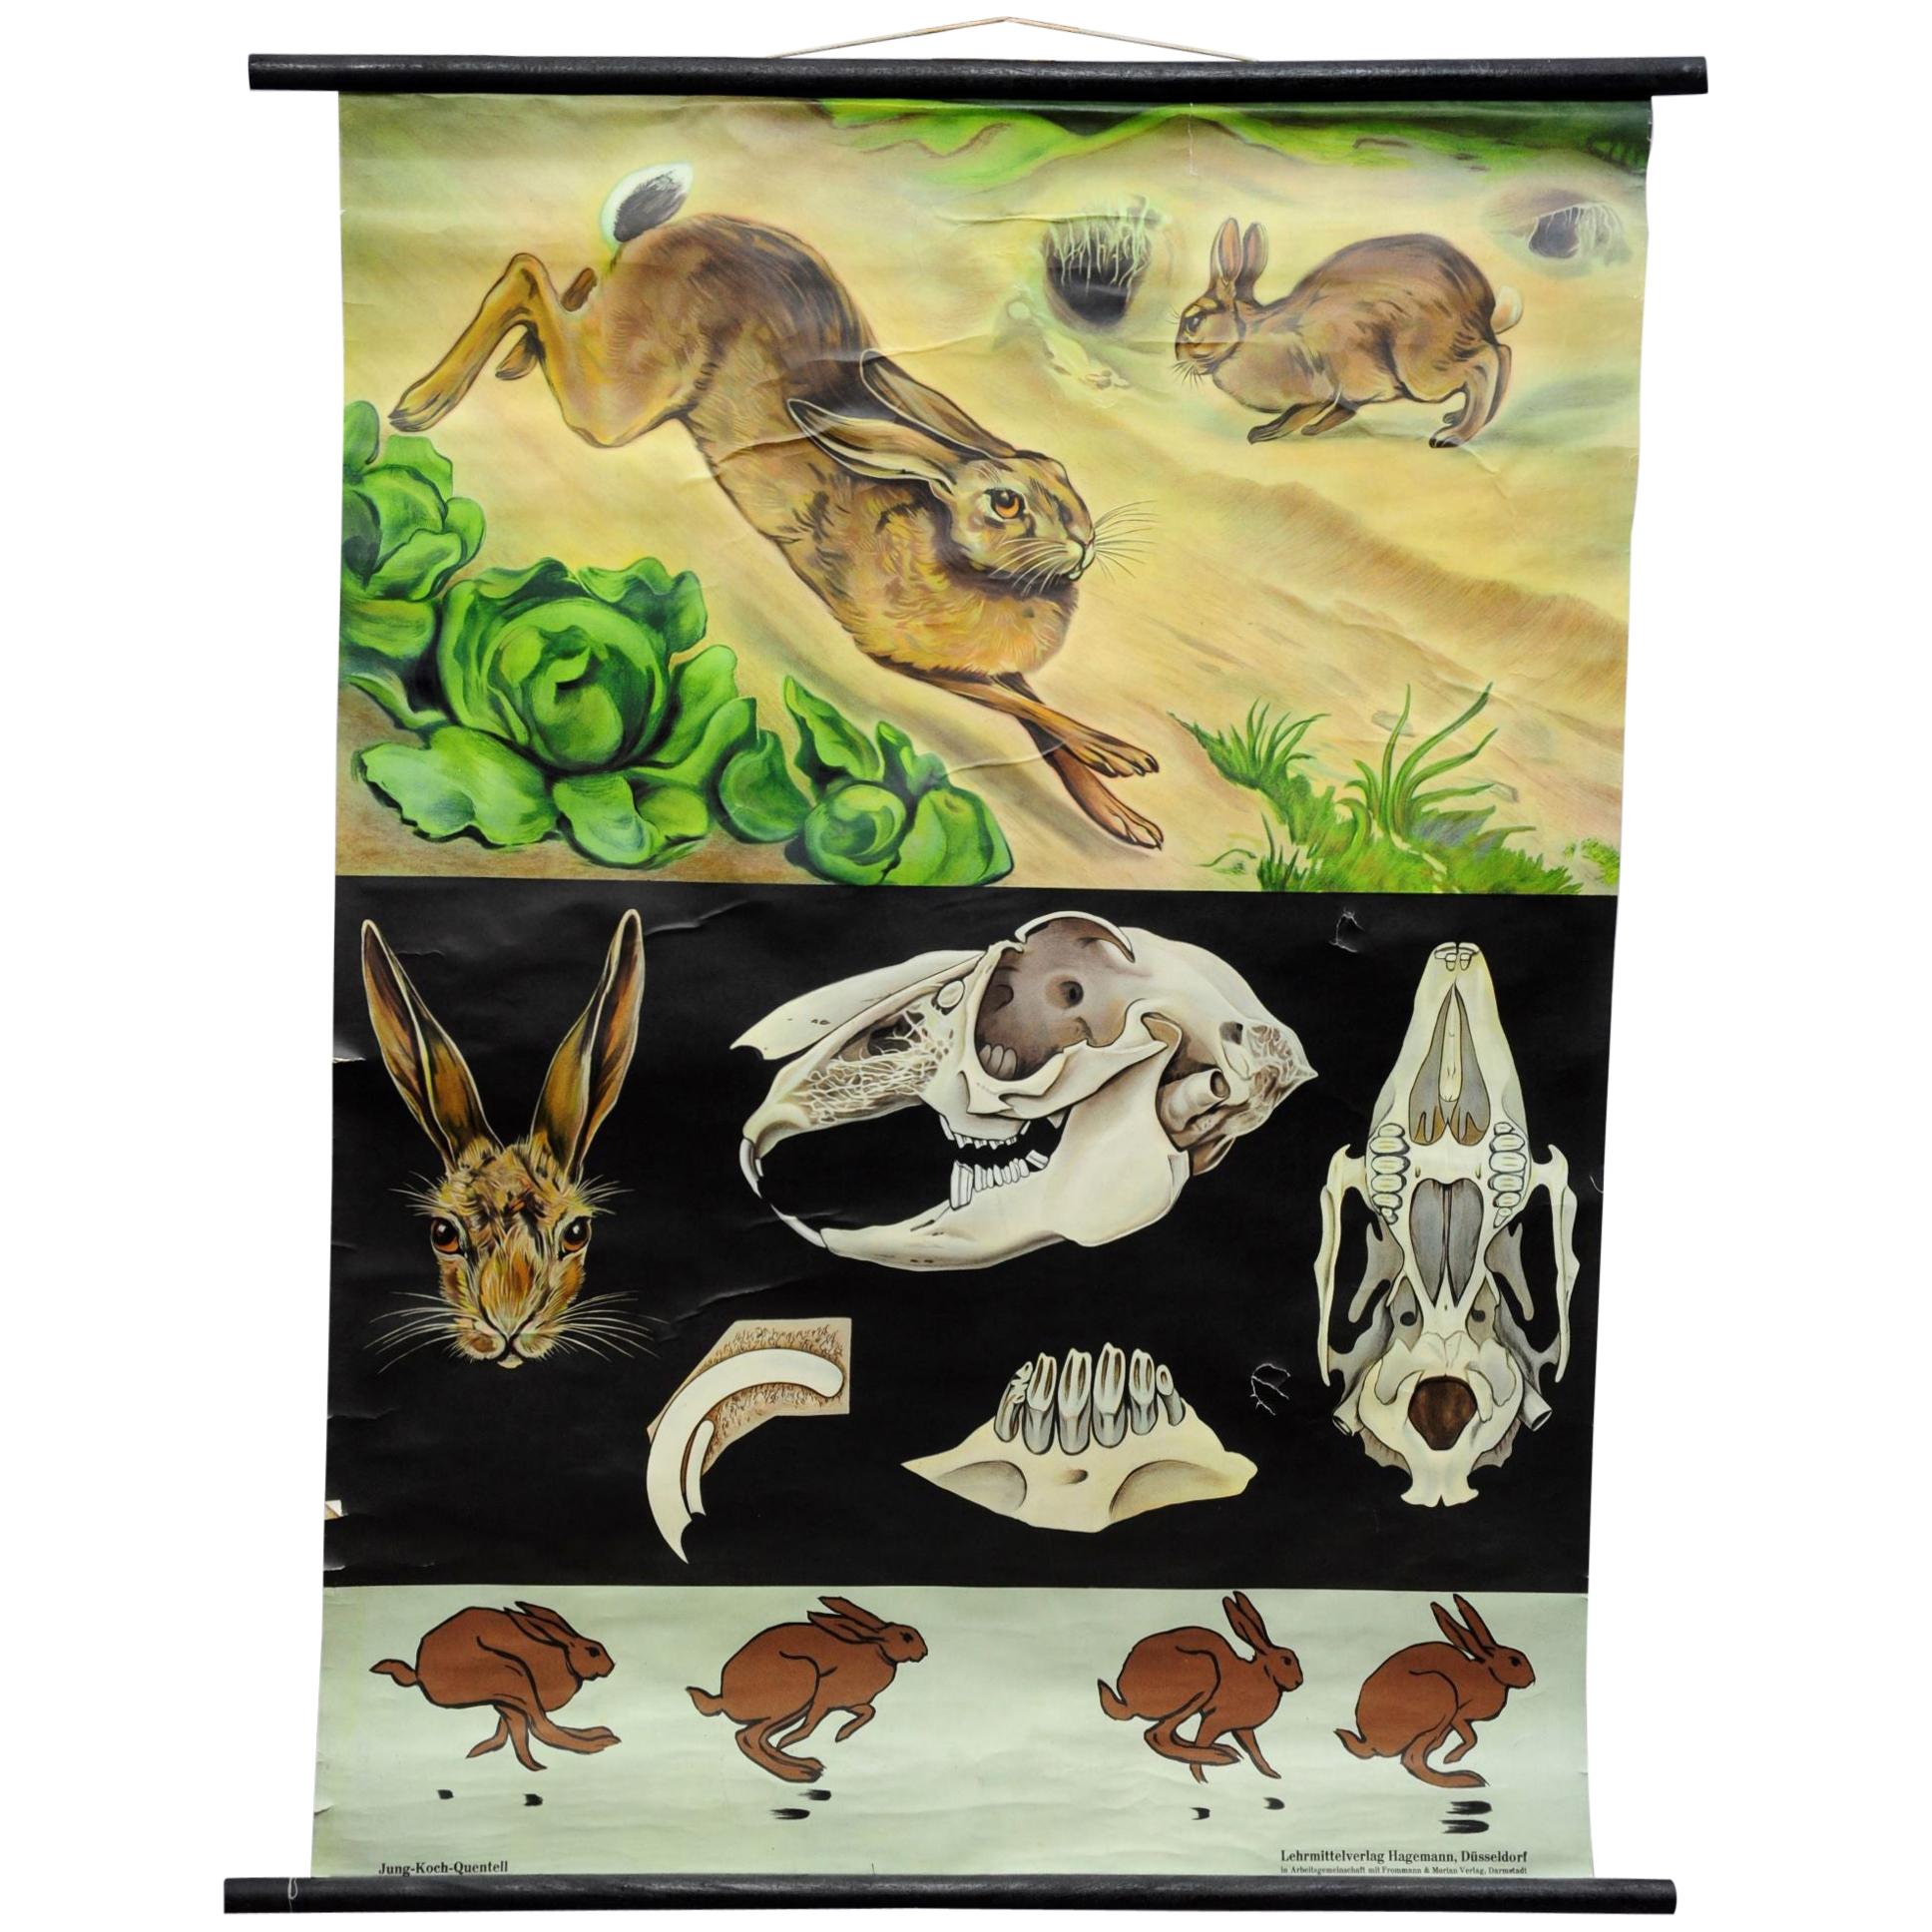 Jung Koch Quentell Vintage Mural Wall Chart Poster Brown Hare Common Rabbit For Sale